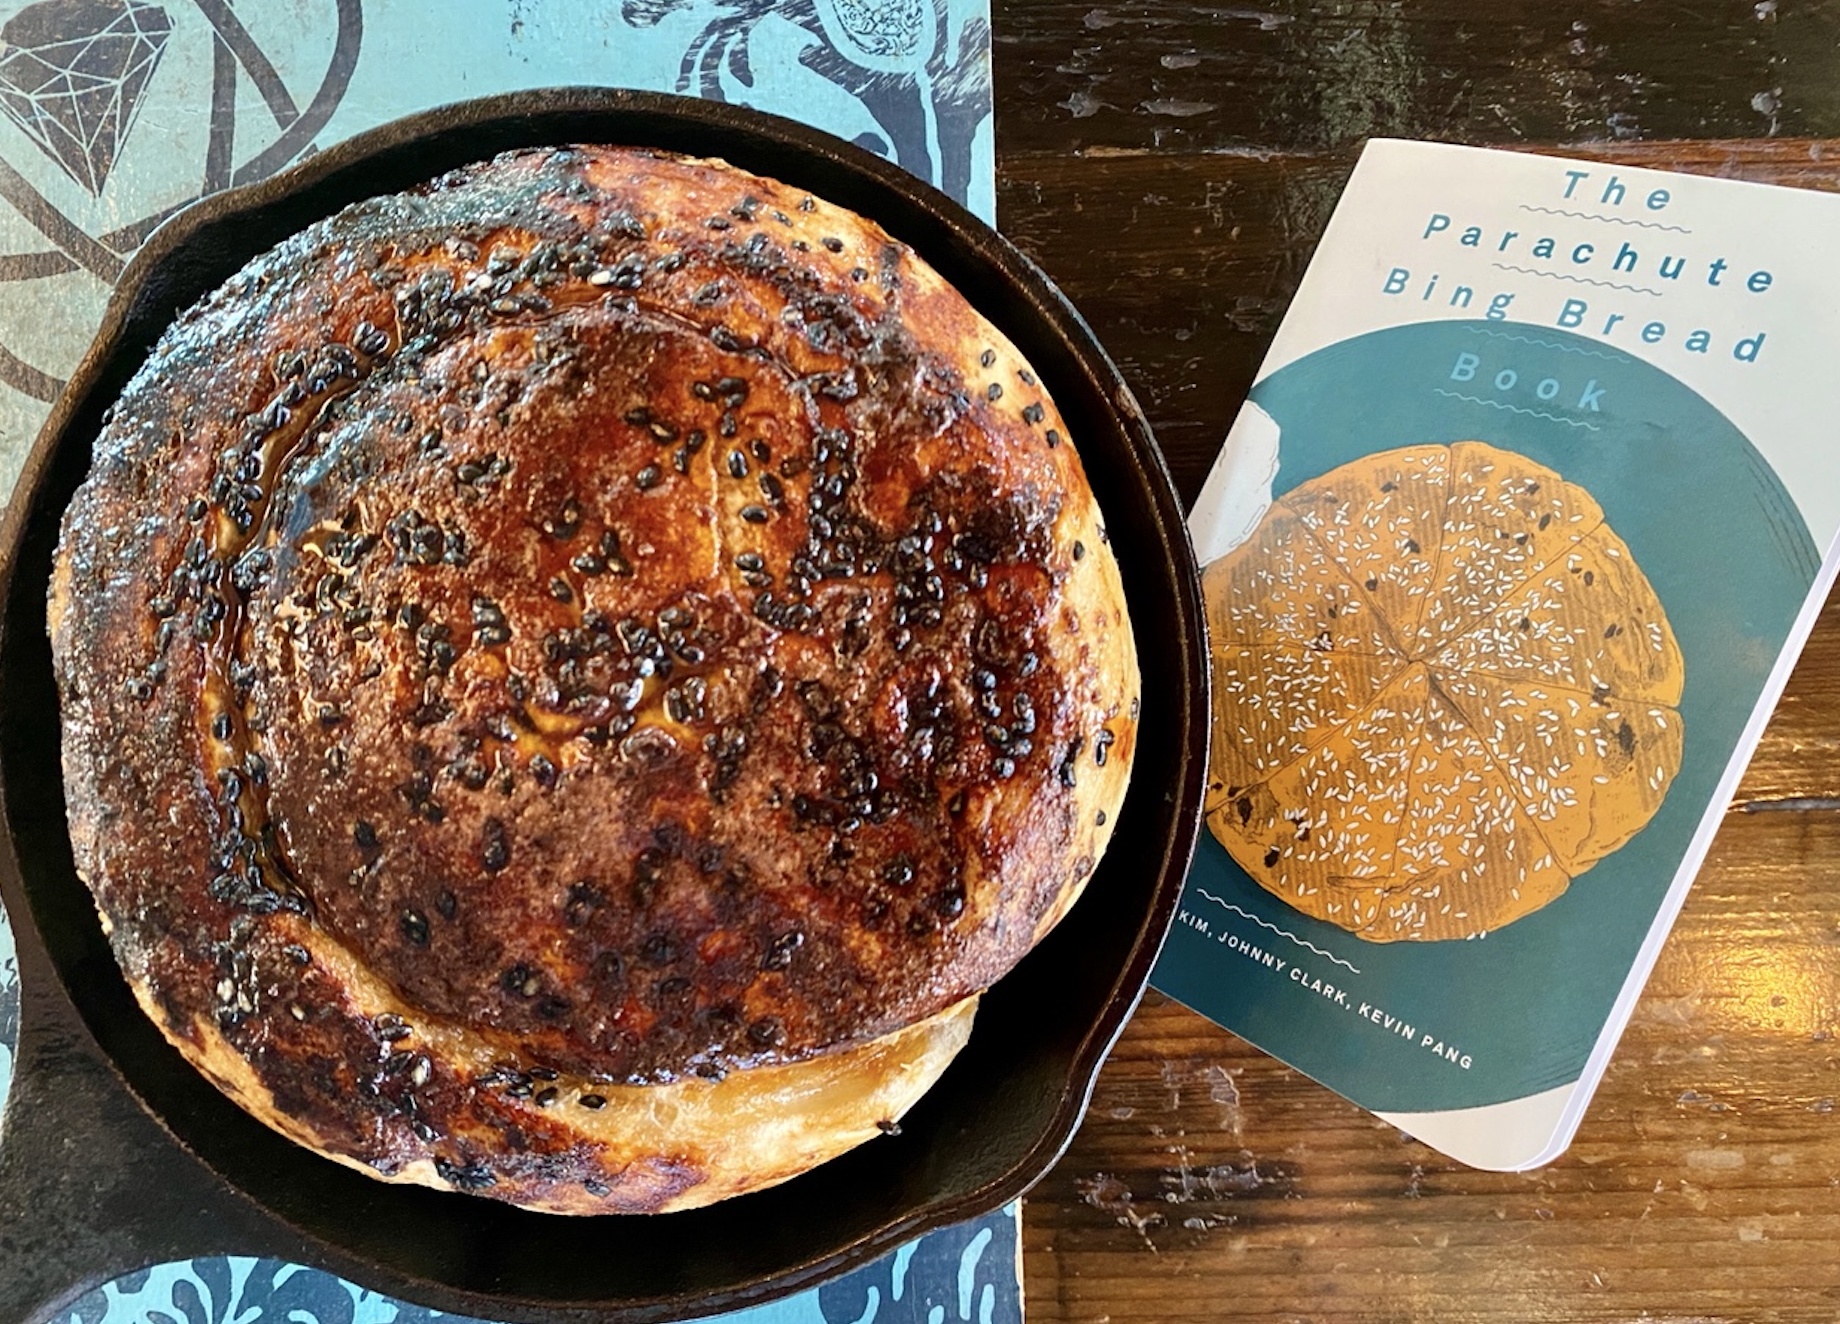 A cast iron pan filled with Bing bread, next to a book called, “The Parachute Bing Bread Book”